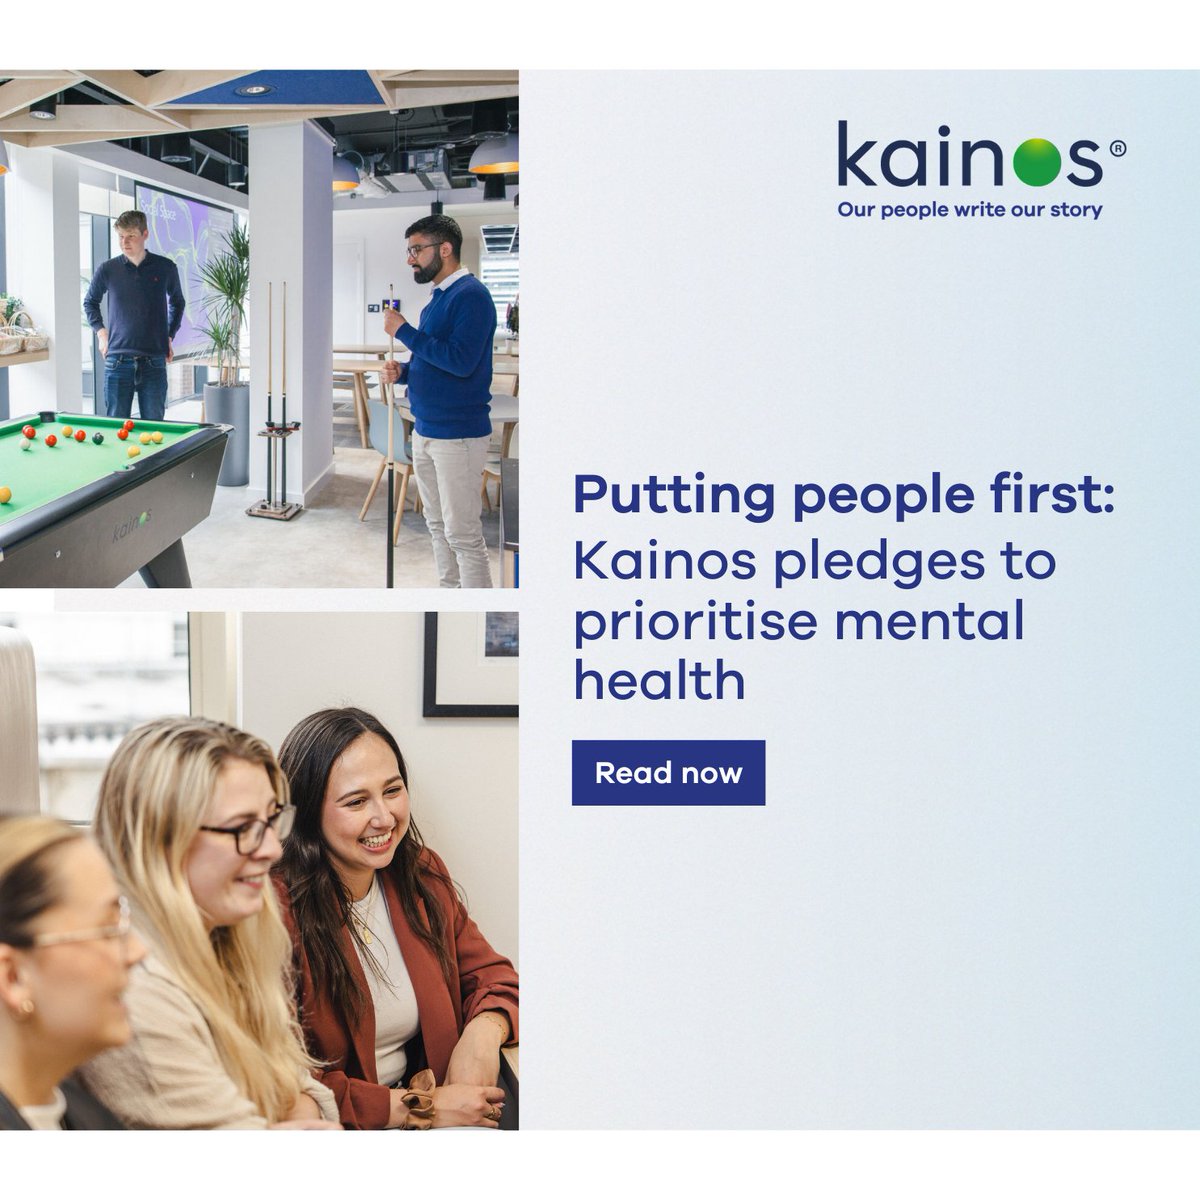 Proud to take a step forward in supporting mental health and wellbeing at Kainos! 💫 Signing the #LeadershipPledge marks the beginning of our journey towards a healthier and happier workplace for all of our people. Read more about our commitment here: kainos.pub/3xg0J9J